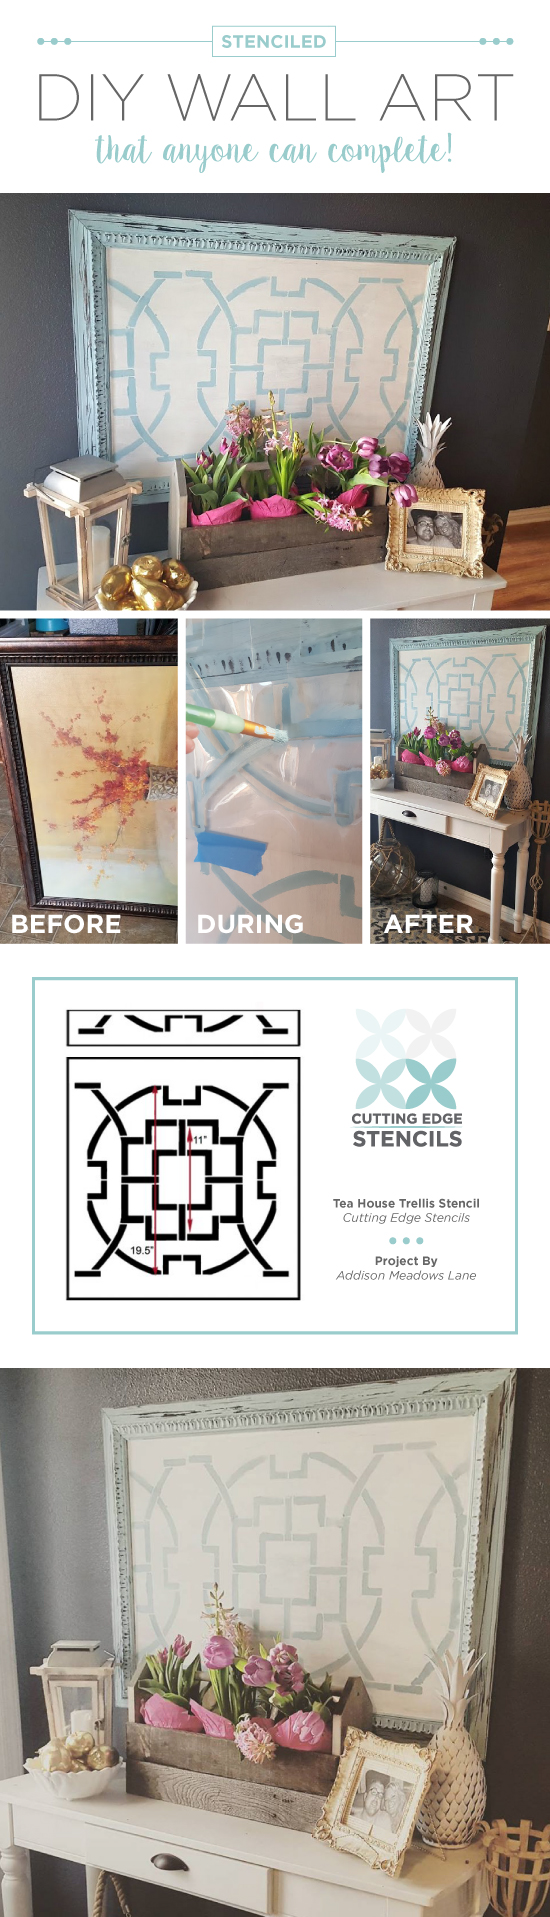 Cutting Edge Stencils shares a tutorial on how to make DIY wall art using an old canvas and the Tea House Trellis Stencil. http://www.cuttingedgestencils.com/tea-house-trellis-allover-stencil-pattern.html